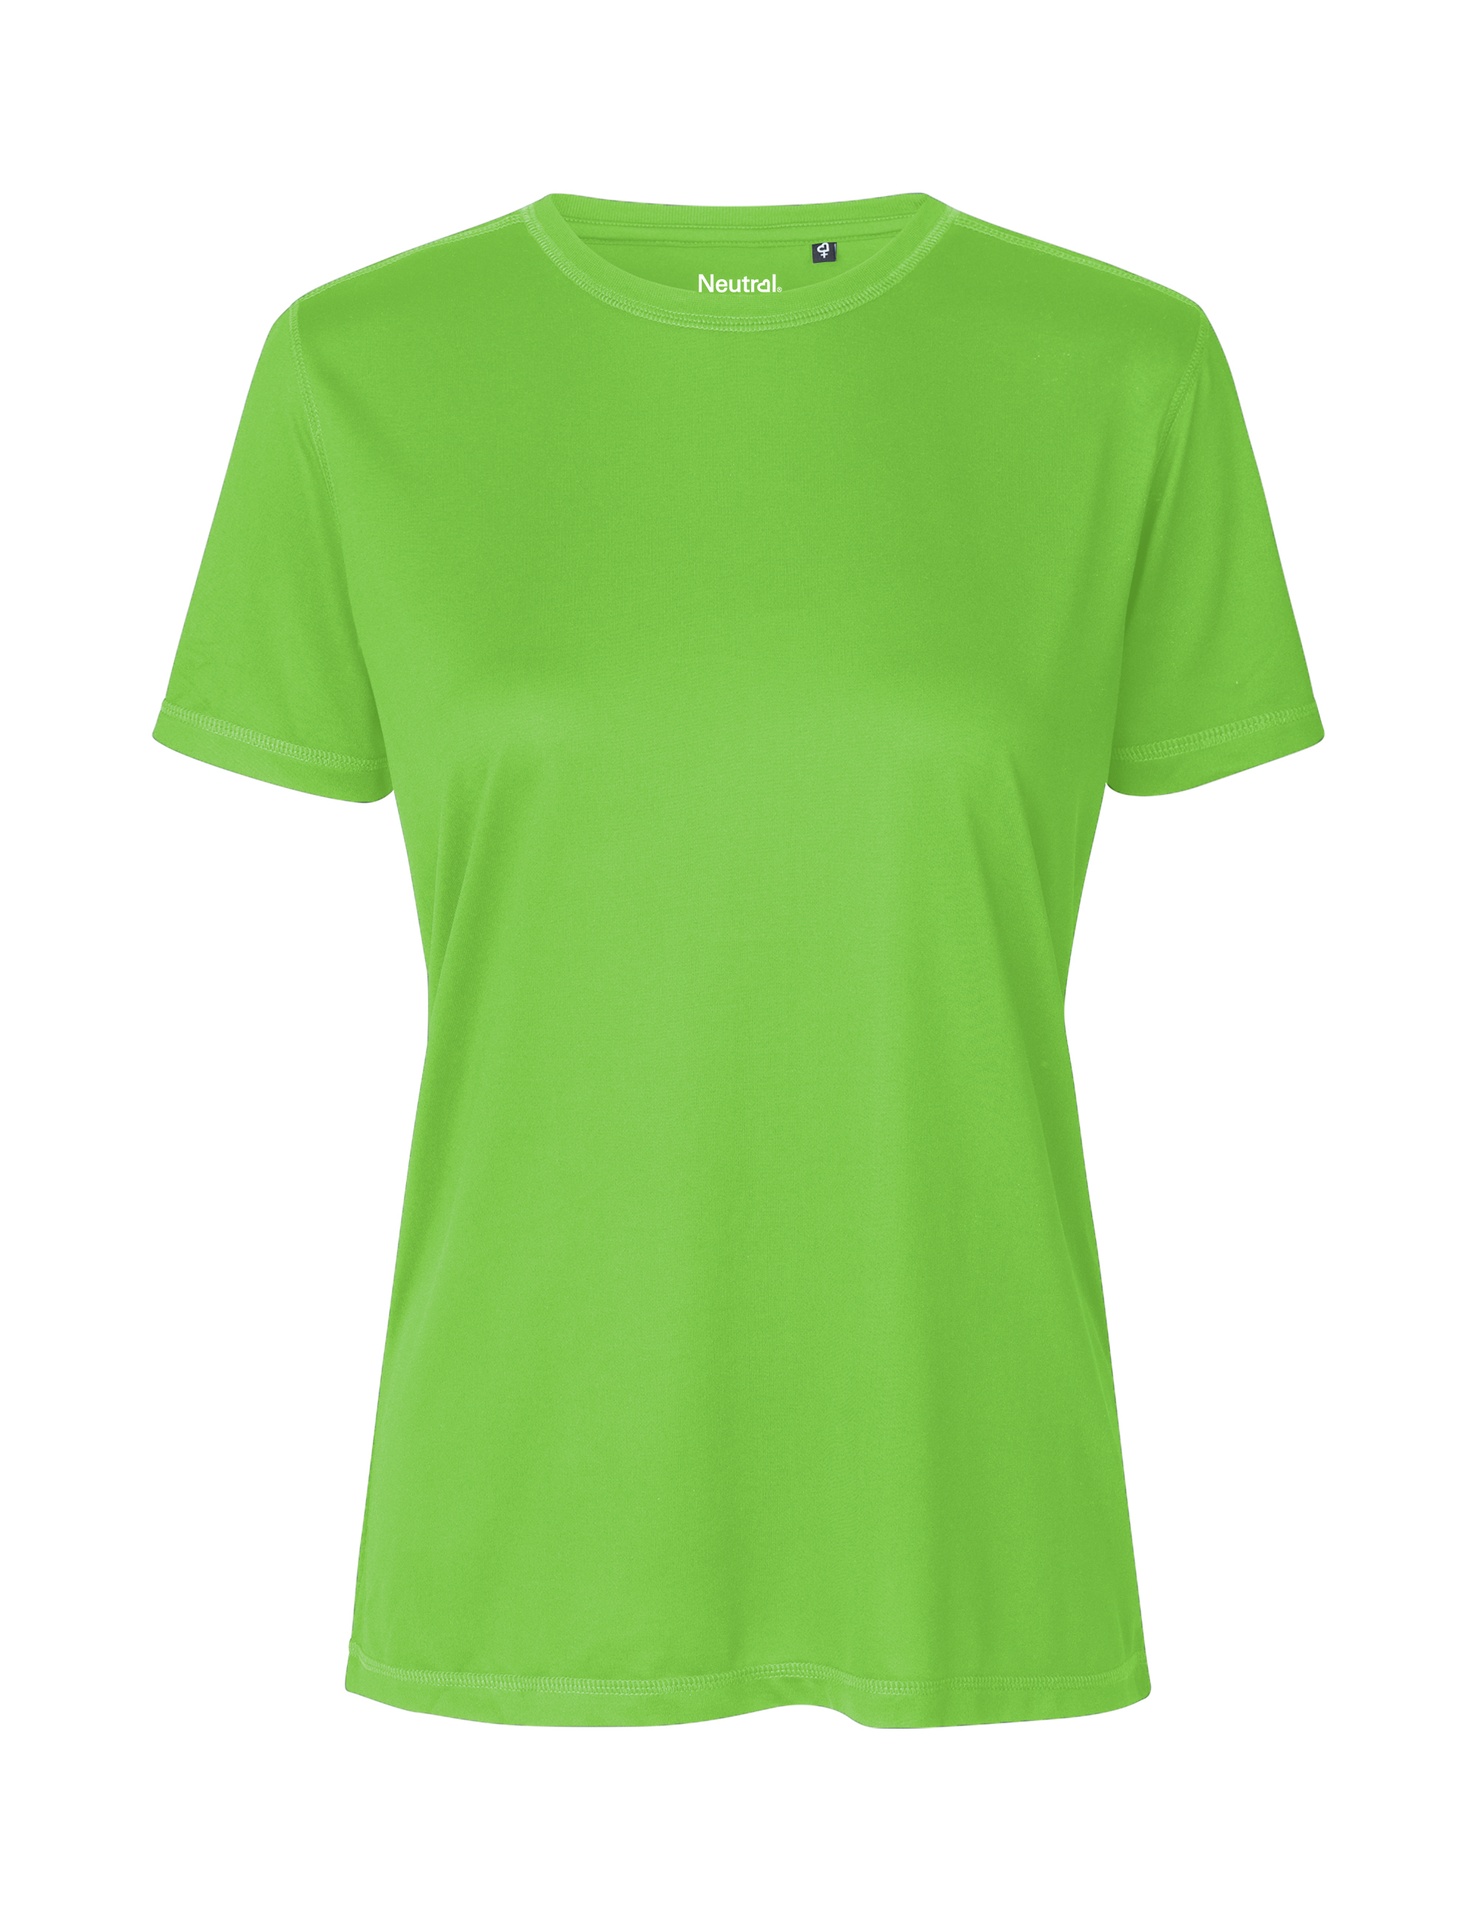 [PR/05222] Ladies Recycled Performance T-Shirt (Lime 12, XS)